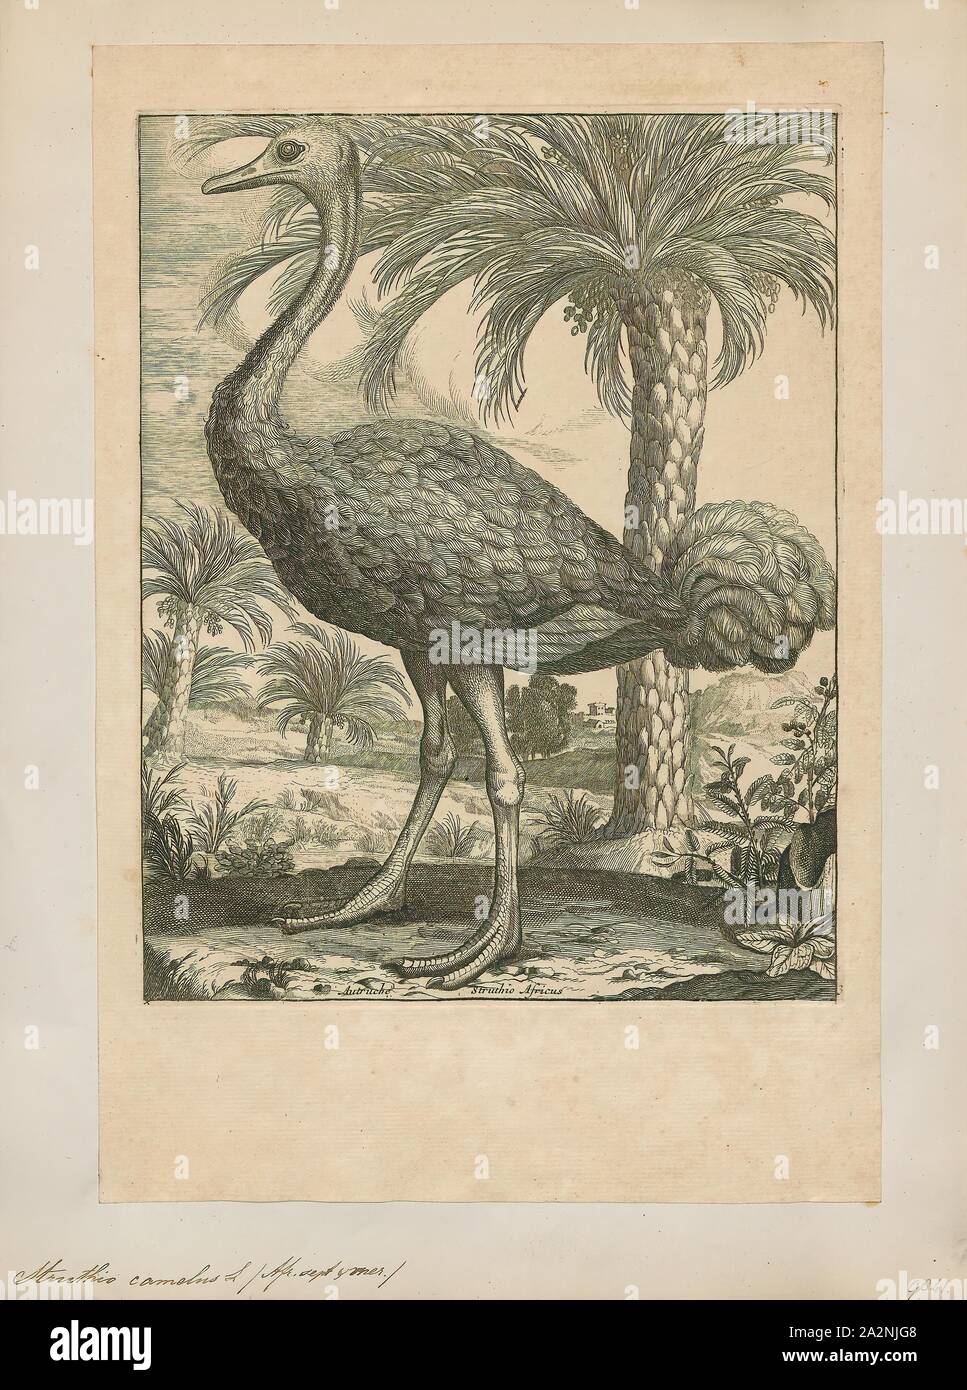 Struthio camelus, Print, The common ostrich (Struthio camelus), or simply ostrich, is a species of large flightless bird native to certain large areas of Africa. It is one of two extant species of ostriches, the only living members of the genus Struthio in the ratite order of birds. The other is the Somali ostrich (Struthio molybdophanes), which was recognized as a distinct species by BirdLife International in 2014 having been previously considered a very distinctive subspecies of ostrich., 1700-1880 Stock Photo